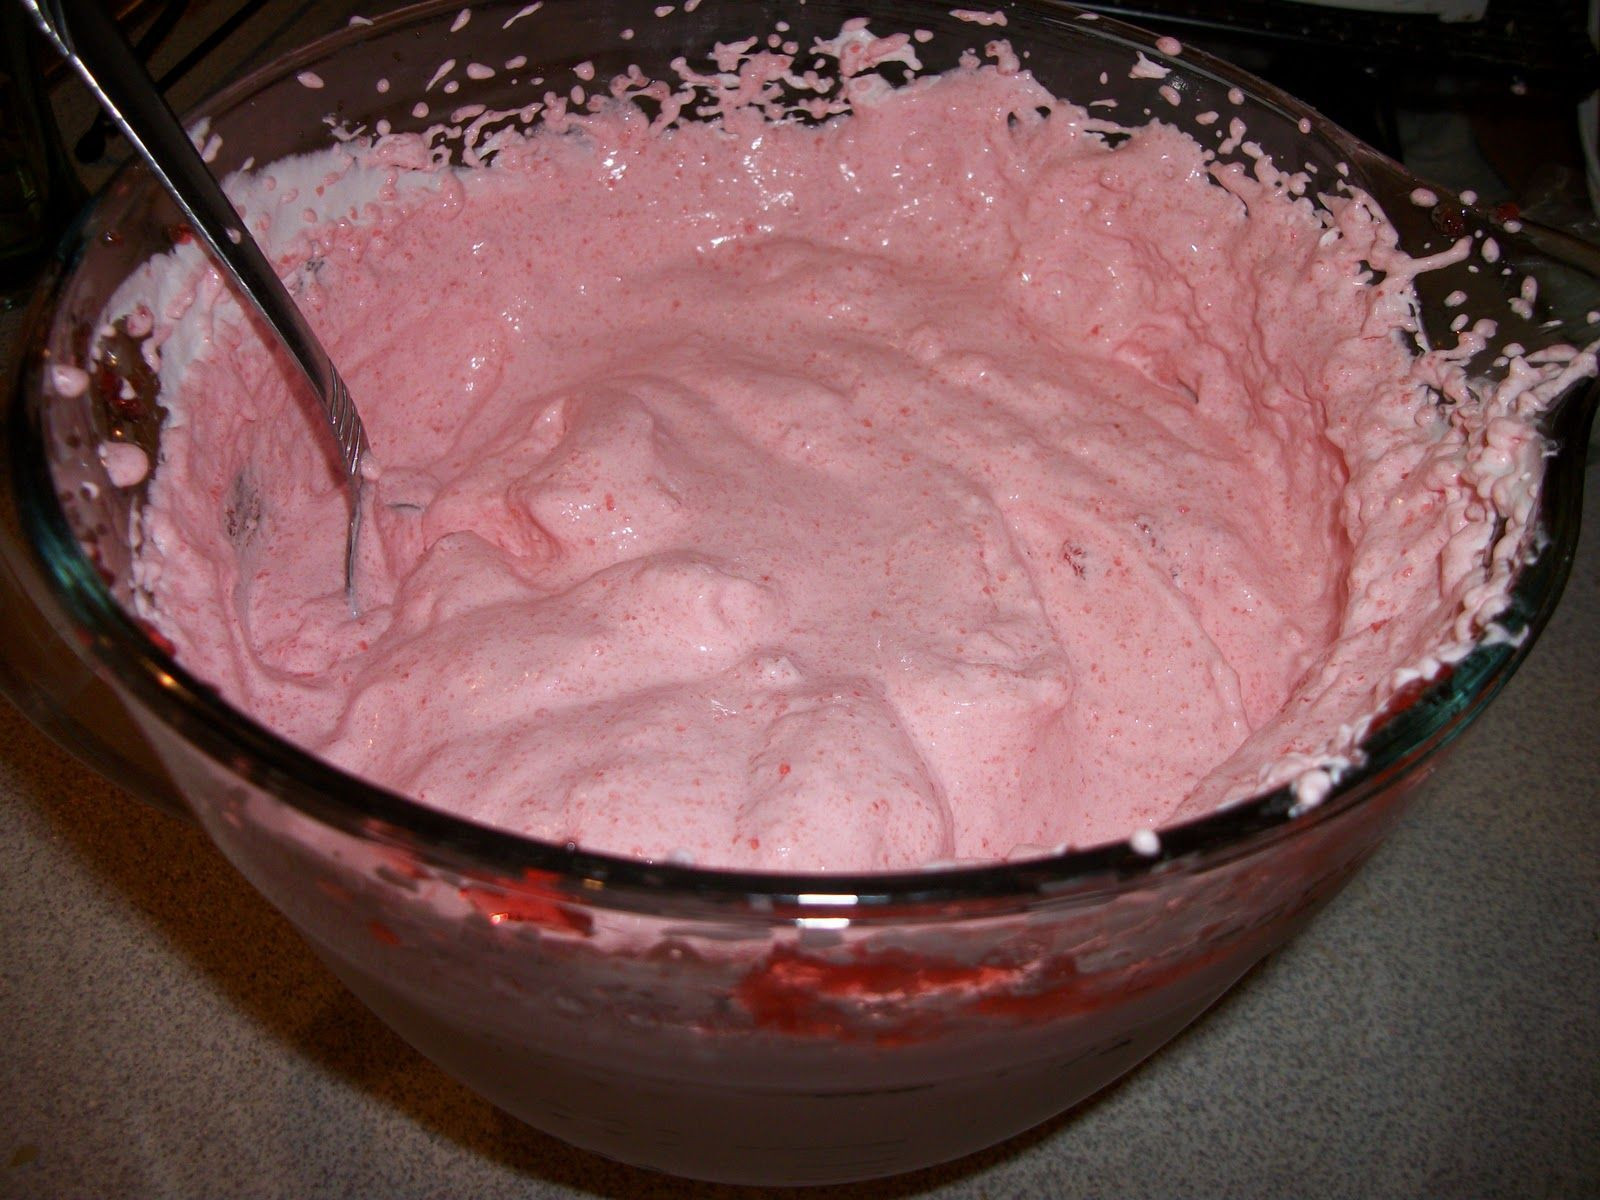 Cool Whip Desserts With Jello
 Best 25 Strawberry fluff ideas on Pinterest